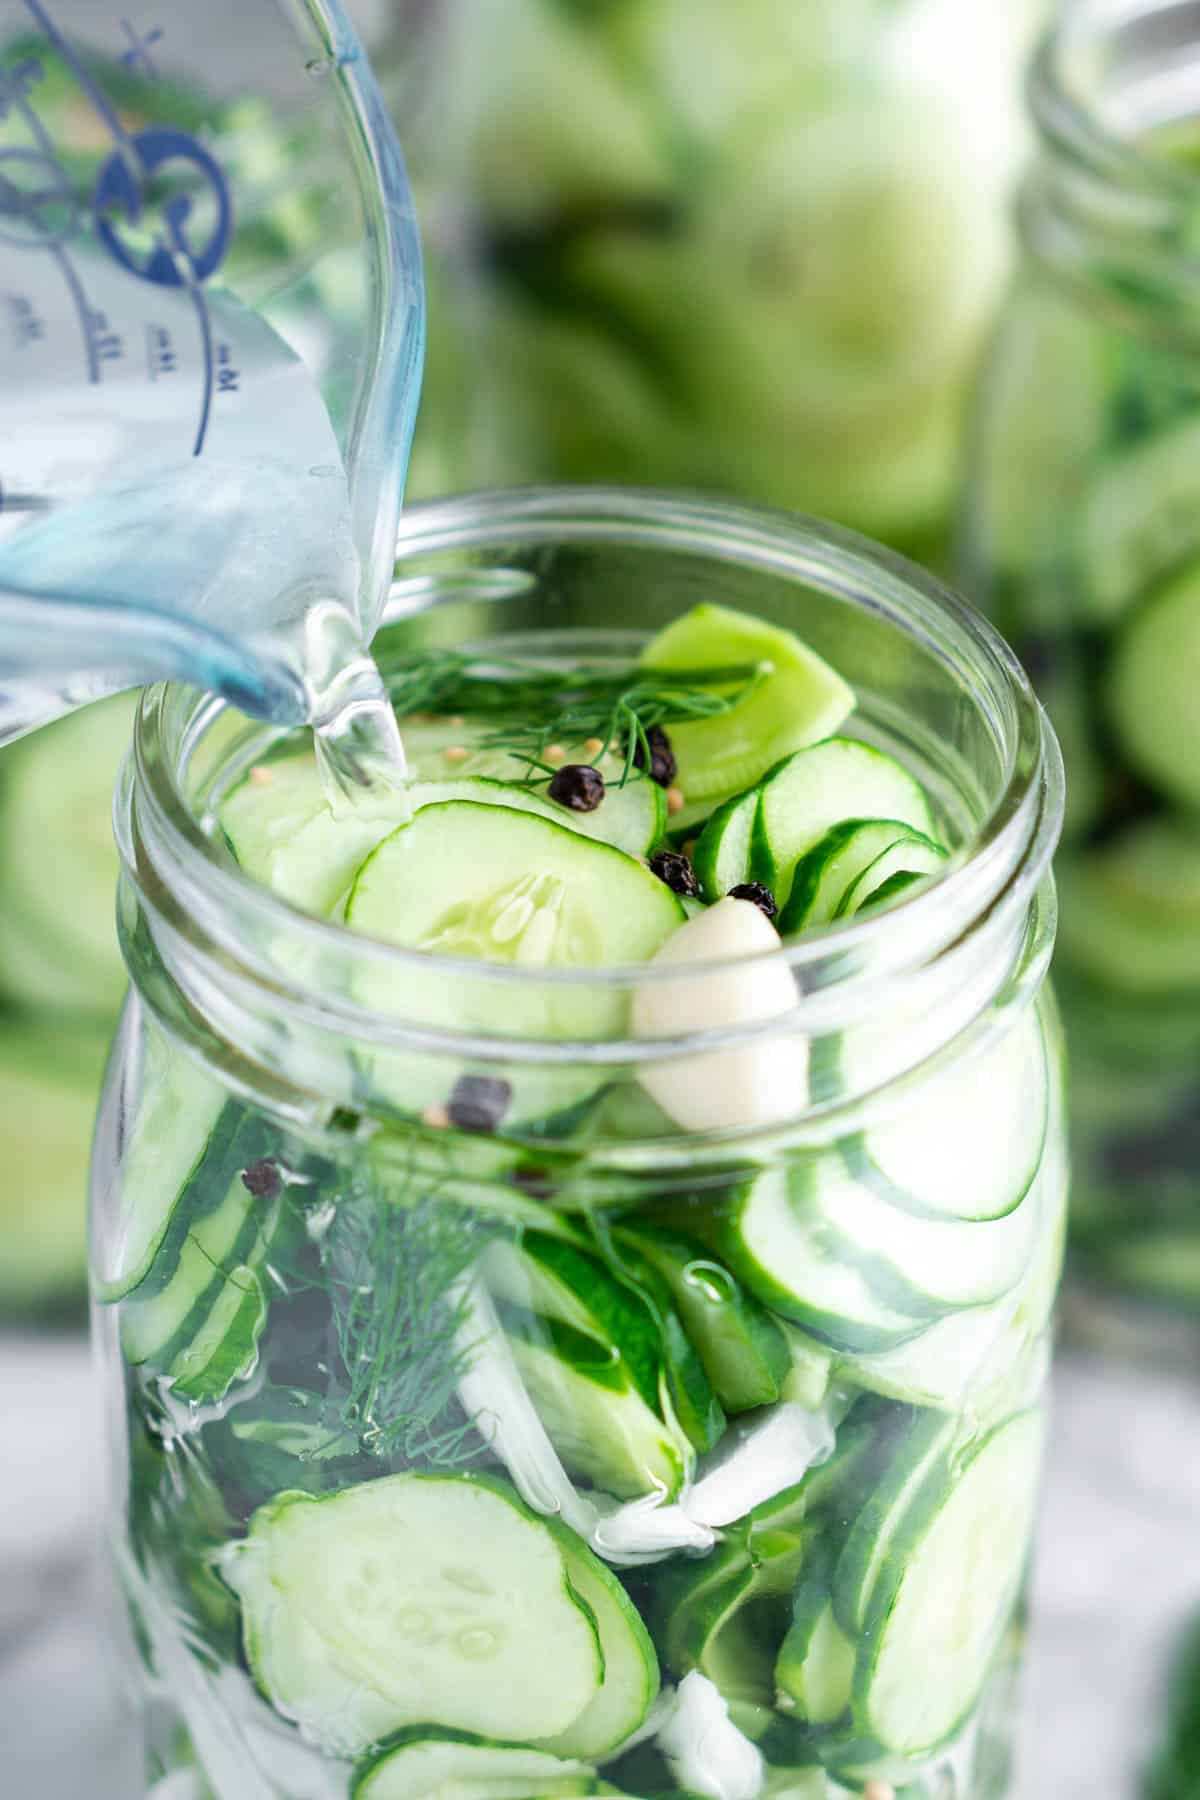 pickling brine is poured into glass jar of ingredients for refrigerator dill pickles